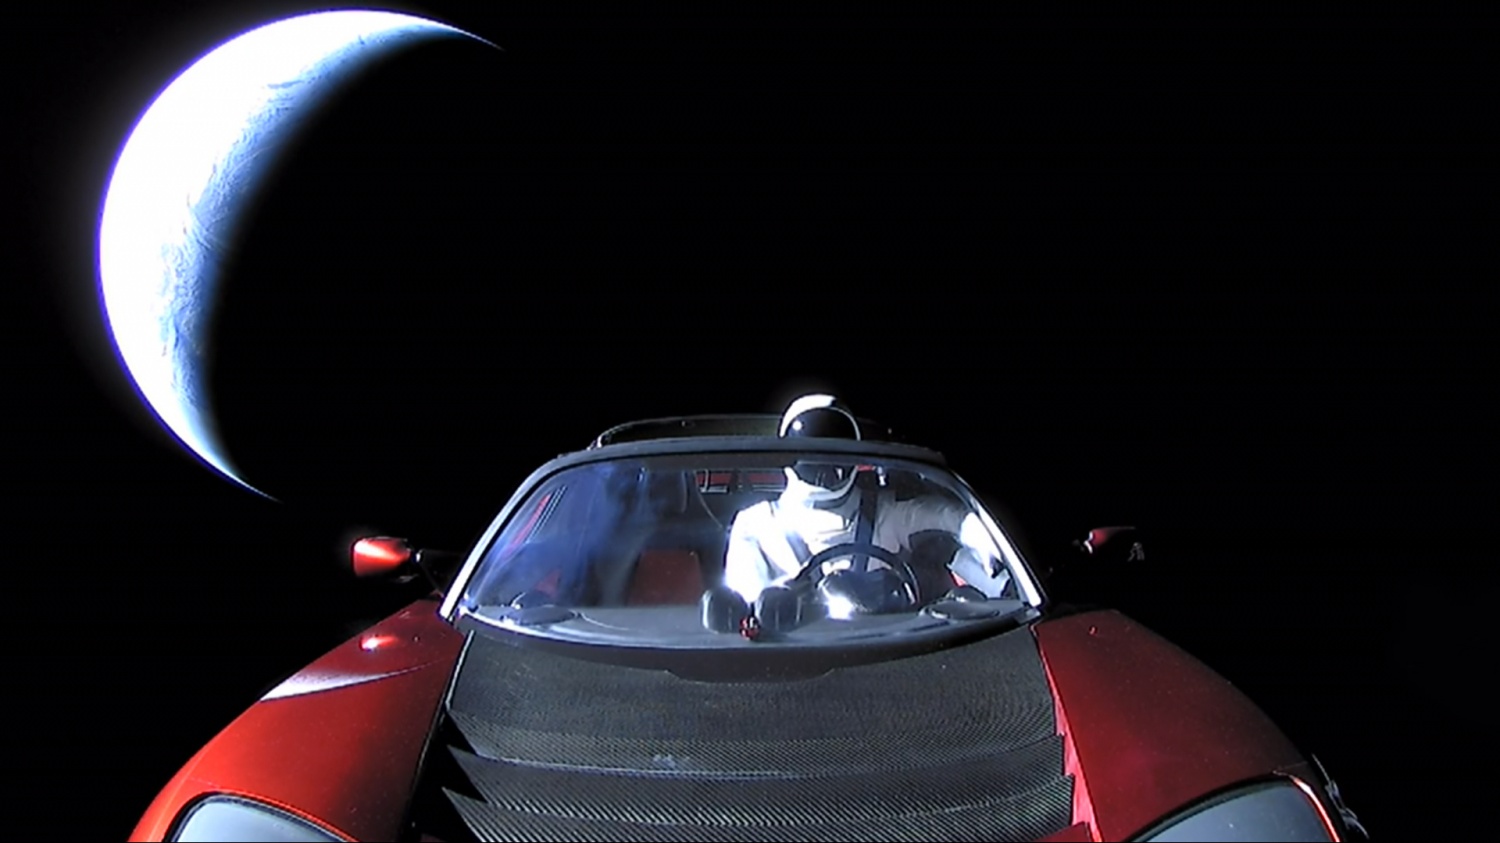 The Starman may have a lonely trip through outer space but one can't lie the view is spectacular 